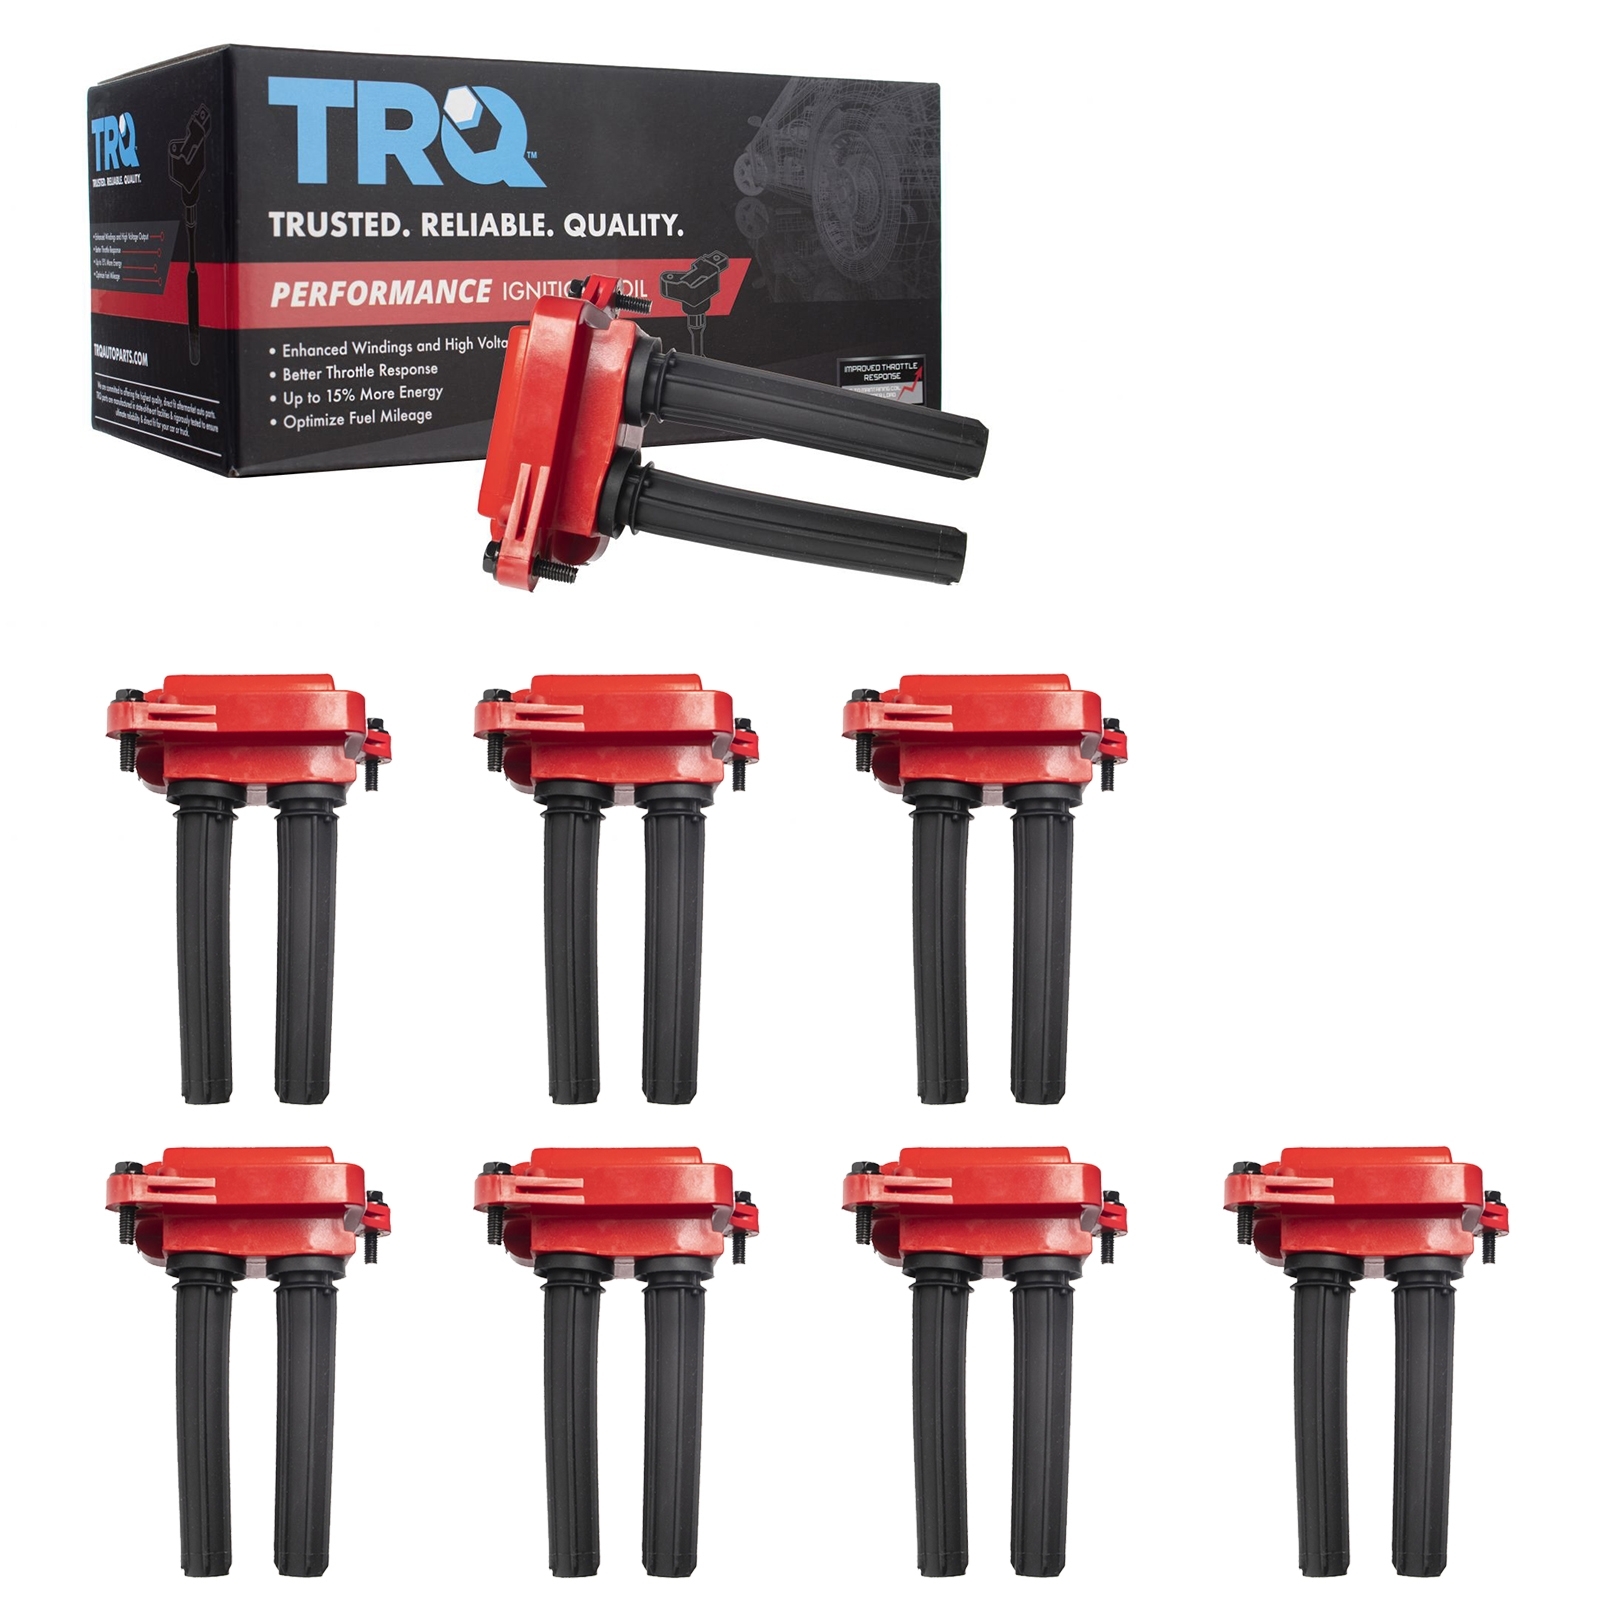 Trq Performance 8 Piece Performance Ignition Coil Set For 06-19 Grand Cherokee 06-10 Commander,